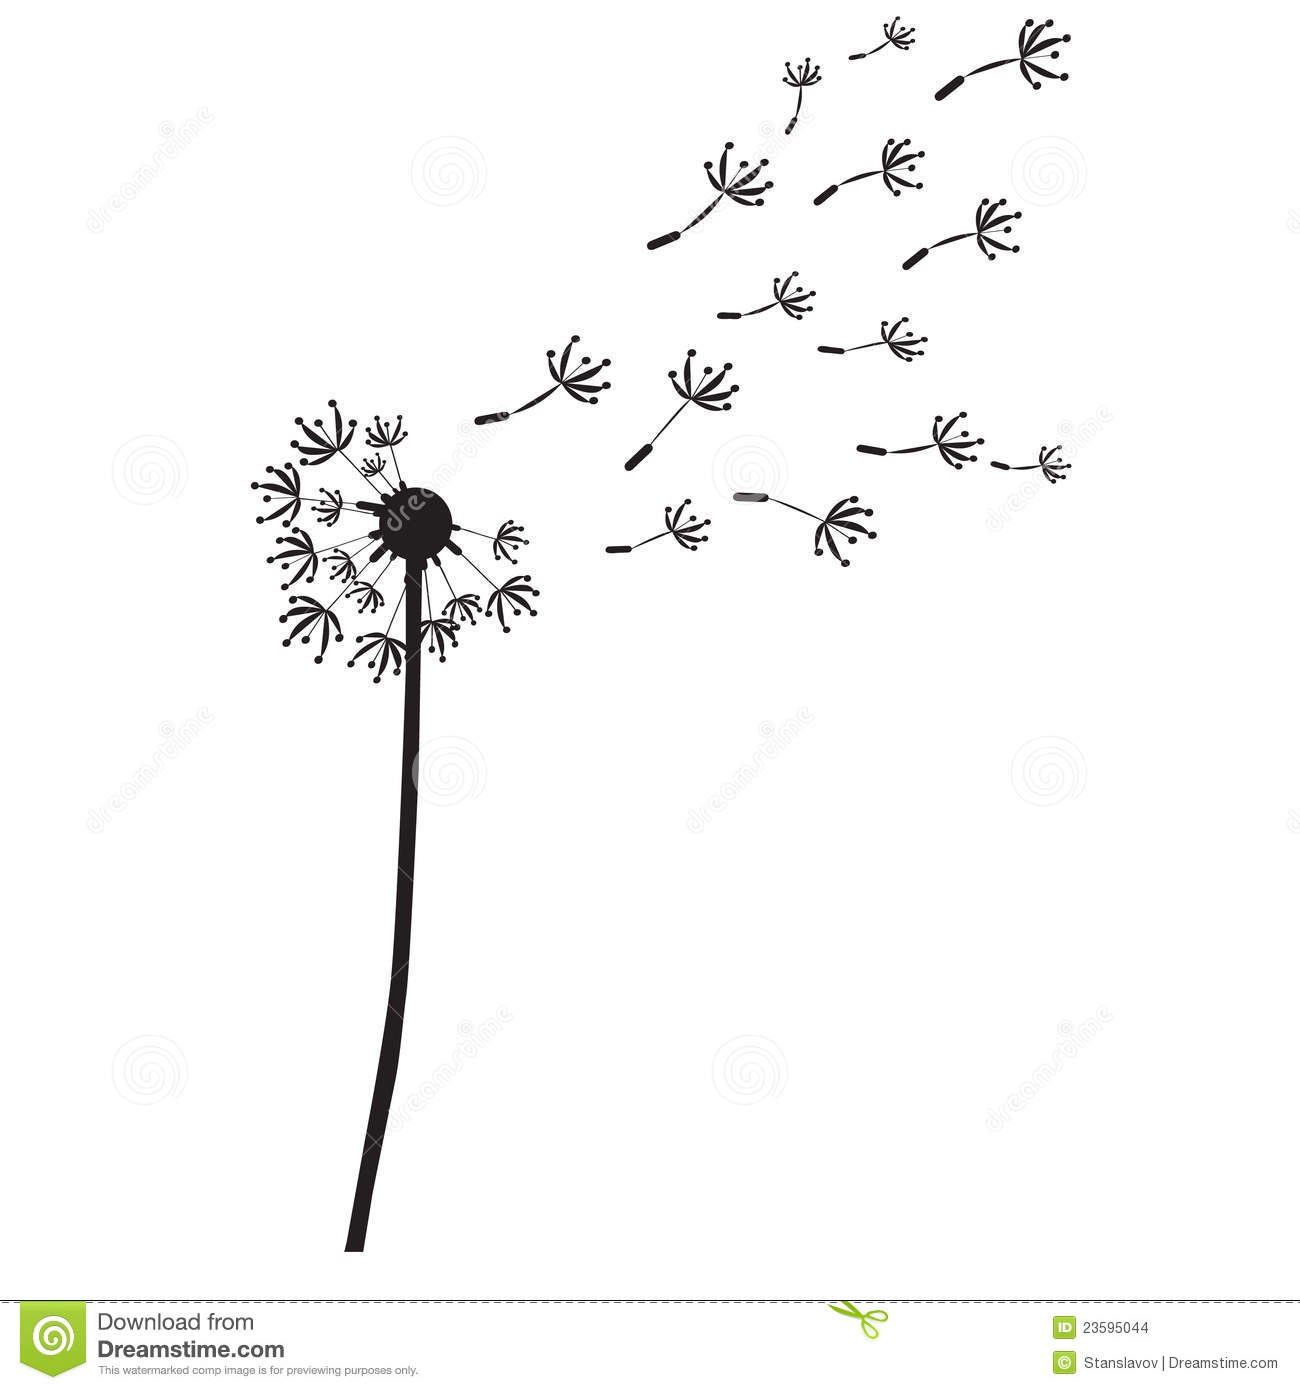 Dandelion Outline Silhouette Stock Images   Image  23595044